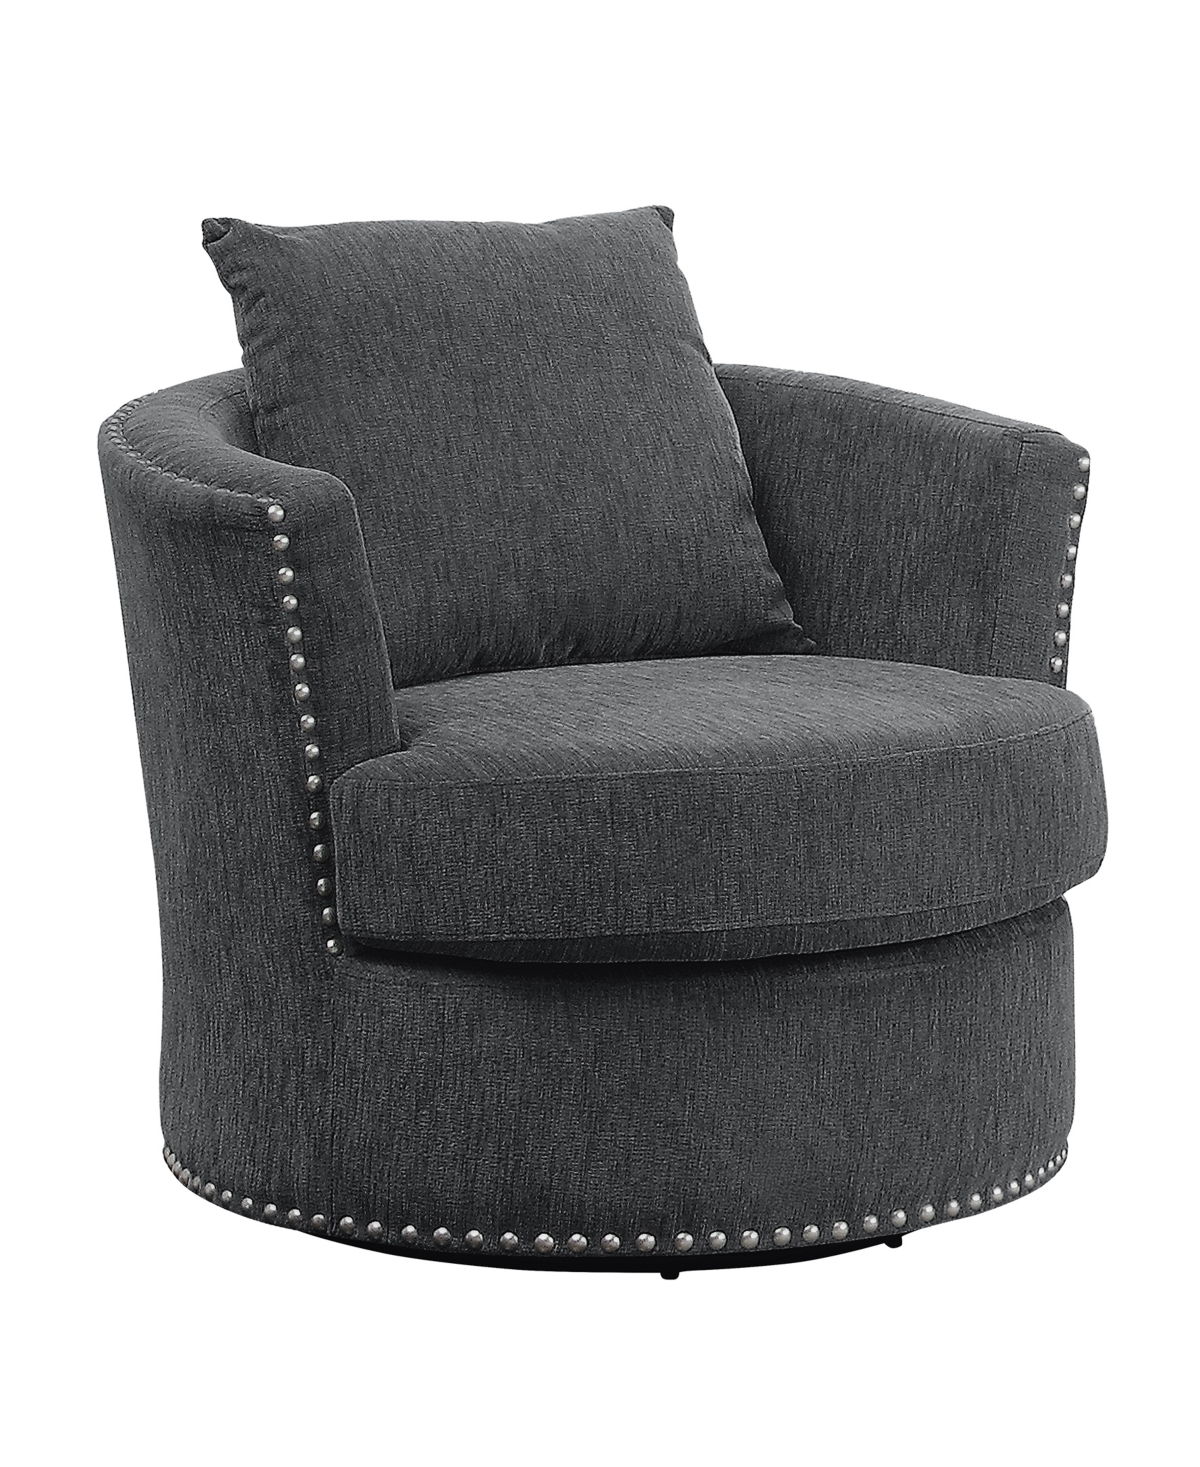 Homelegance White Label Dickinson 33.5" Swivel Chair In Charcoal